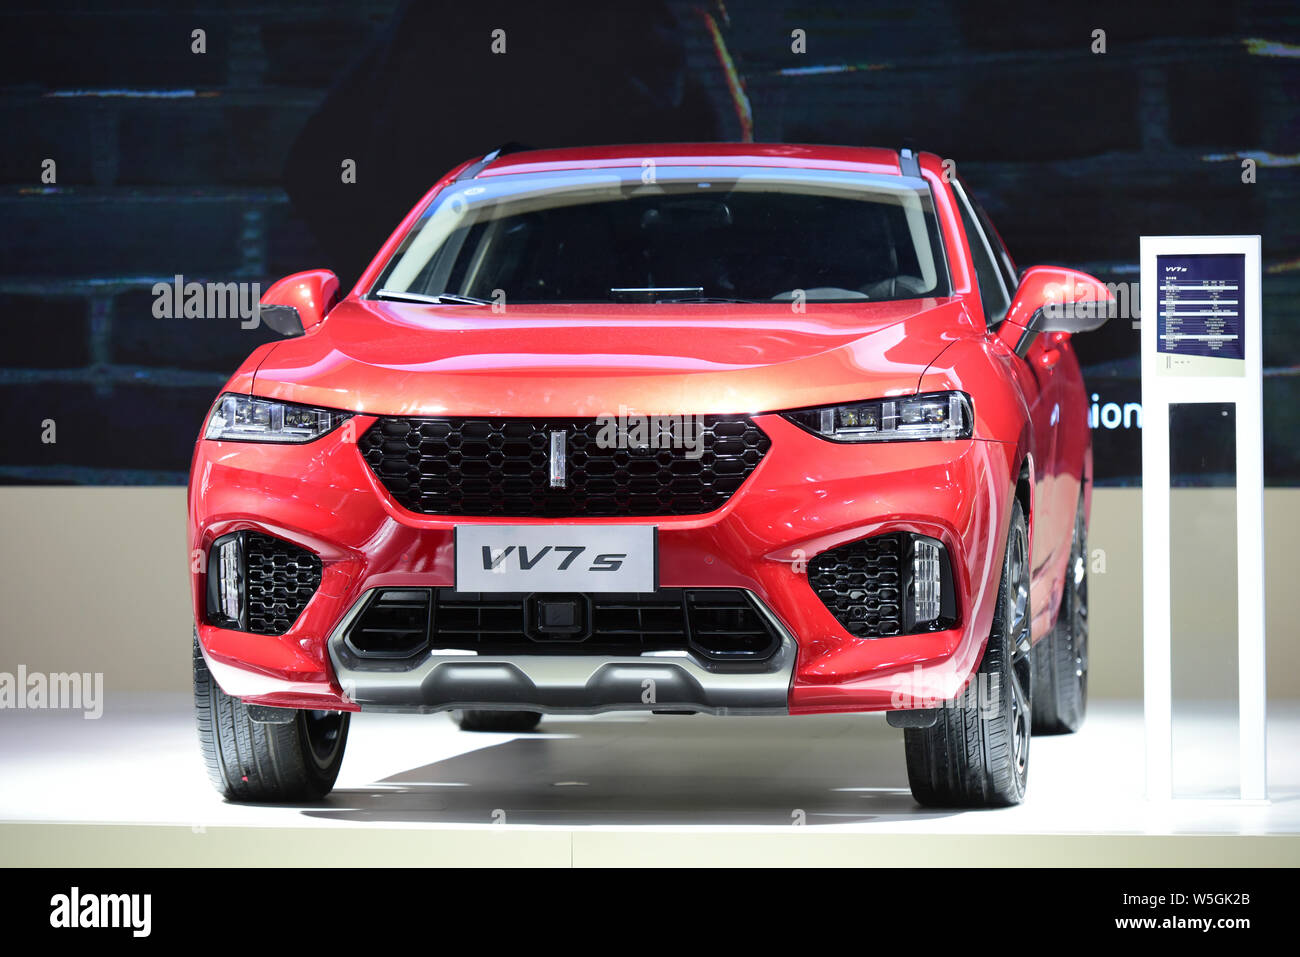 --FILE--A Lincoln VV7s is on display during an exhibition in Xi'an city, northwest China's Shaanxi province, 5 July 2017.   Luxury vehicle brand Linco Stock Photo